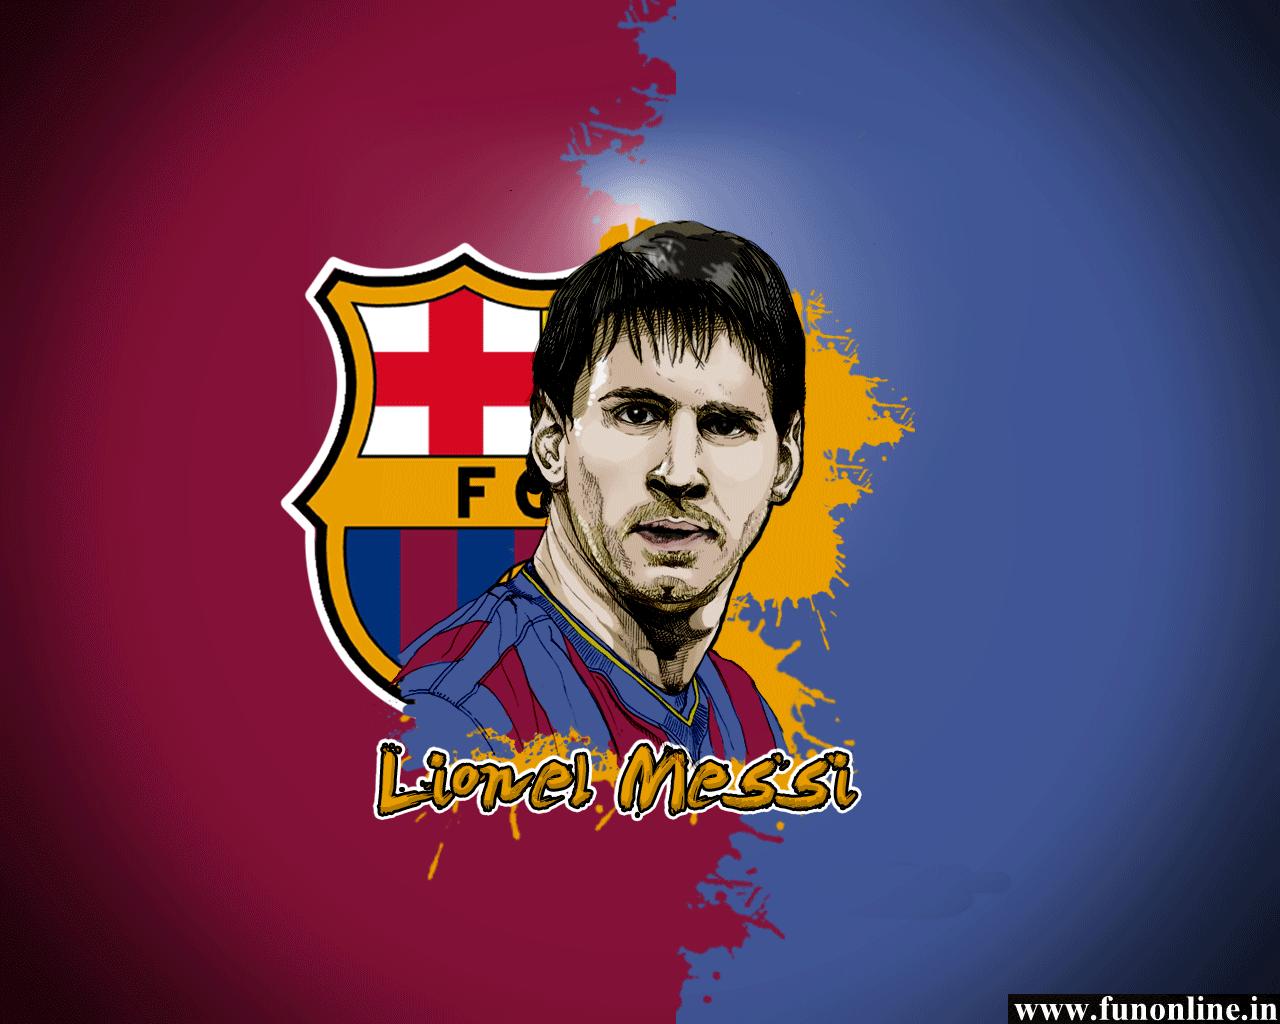 Lionel Messi Wallpapers Download Amazing Lionel Messi HD Wallpaper